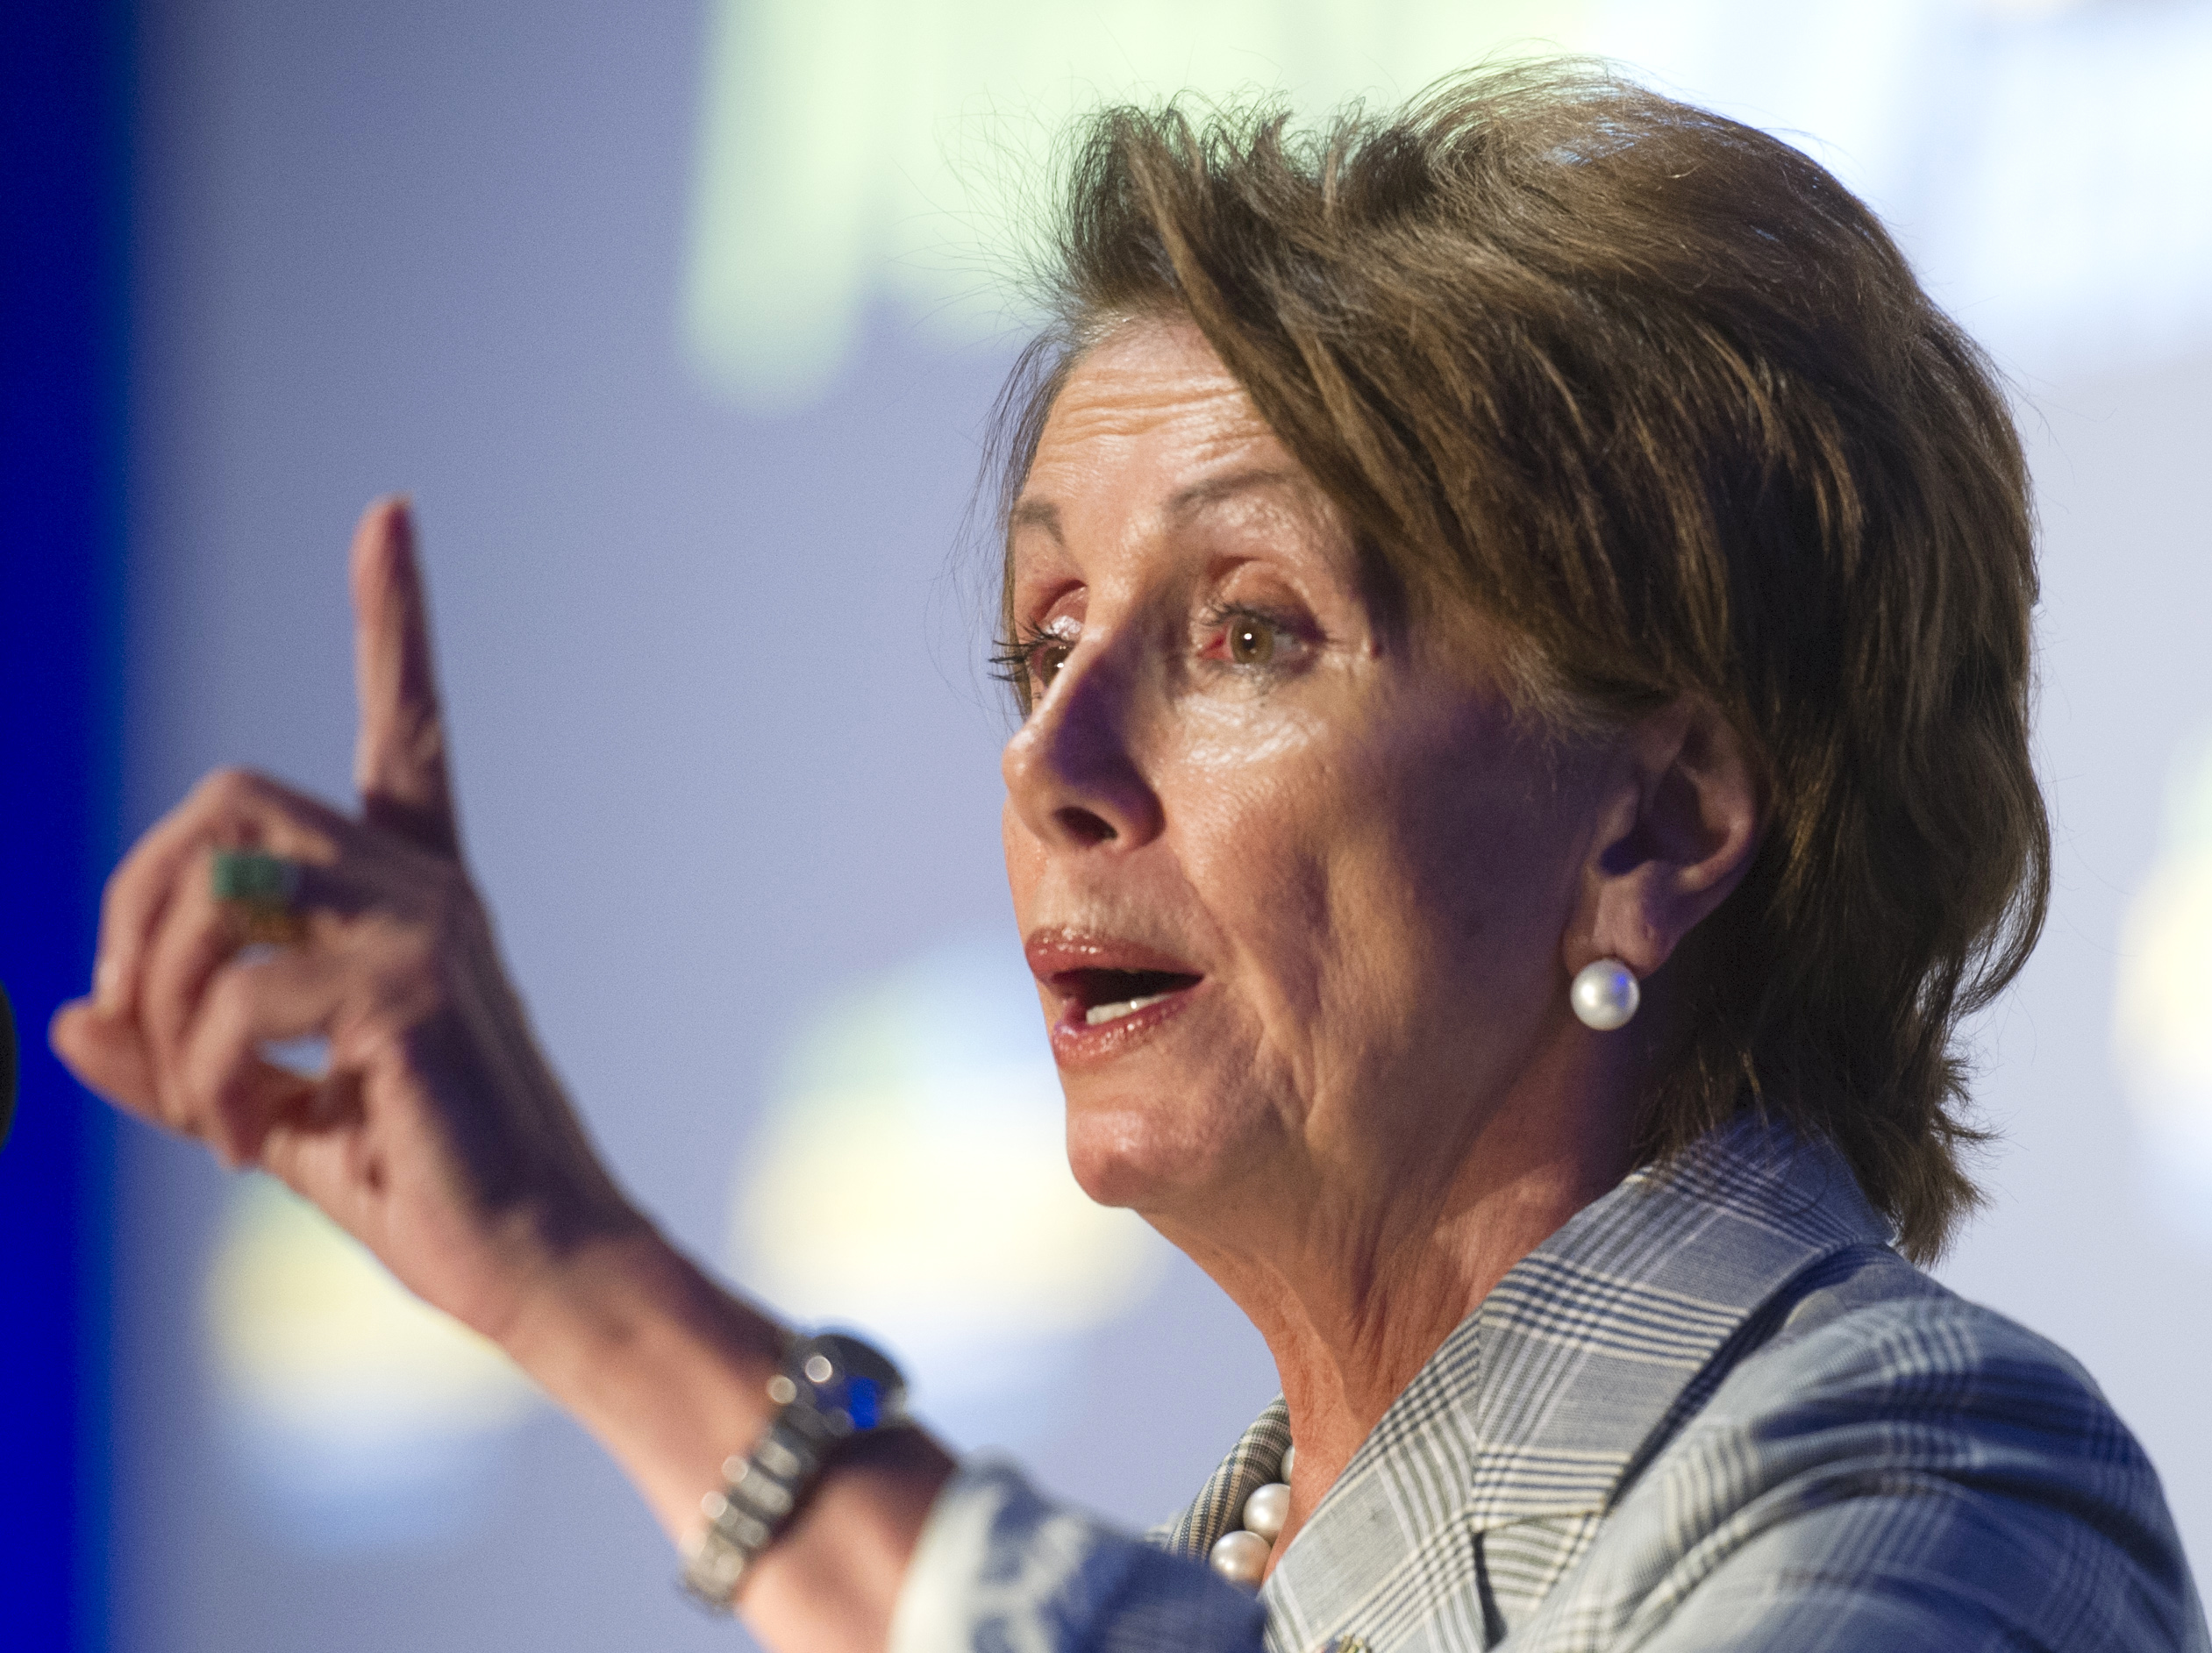 Company co-founded by Nancy Pelosi's son charged with securities fraud - Washington Times